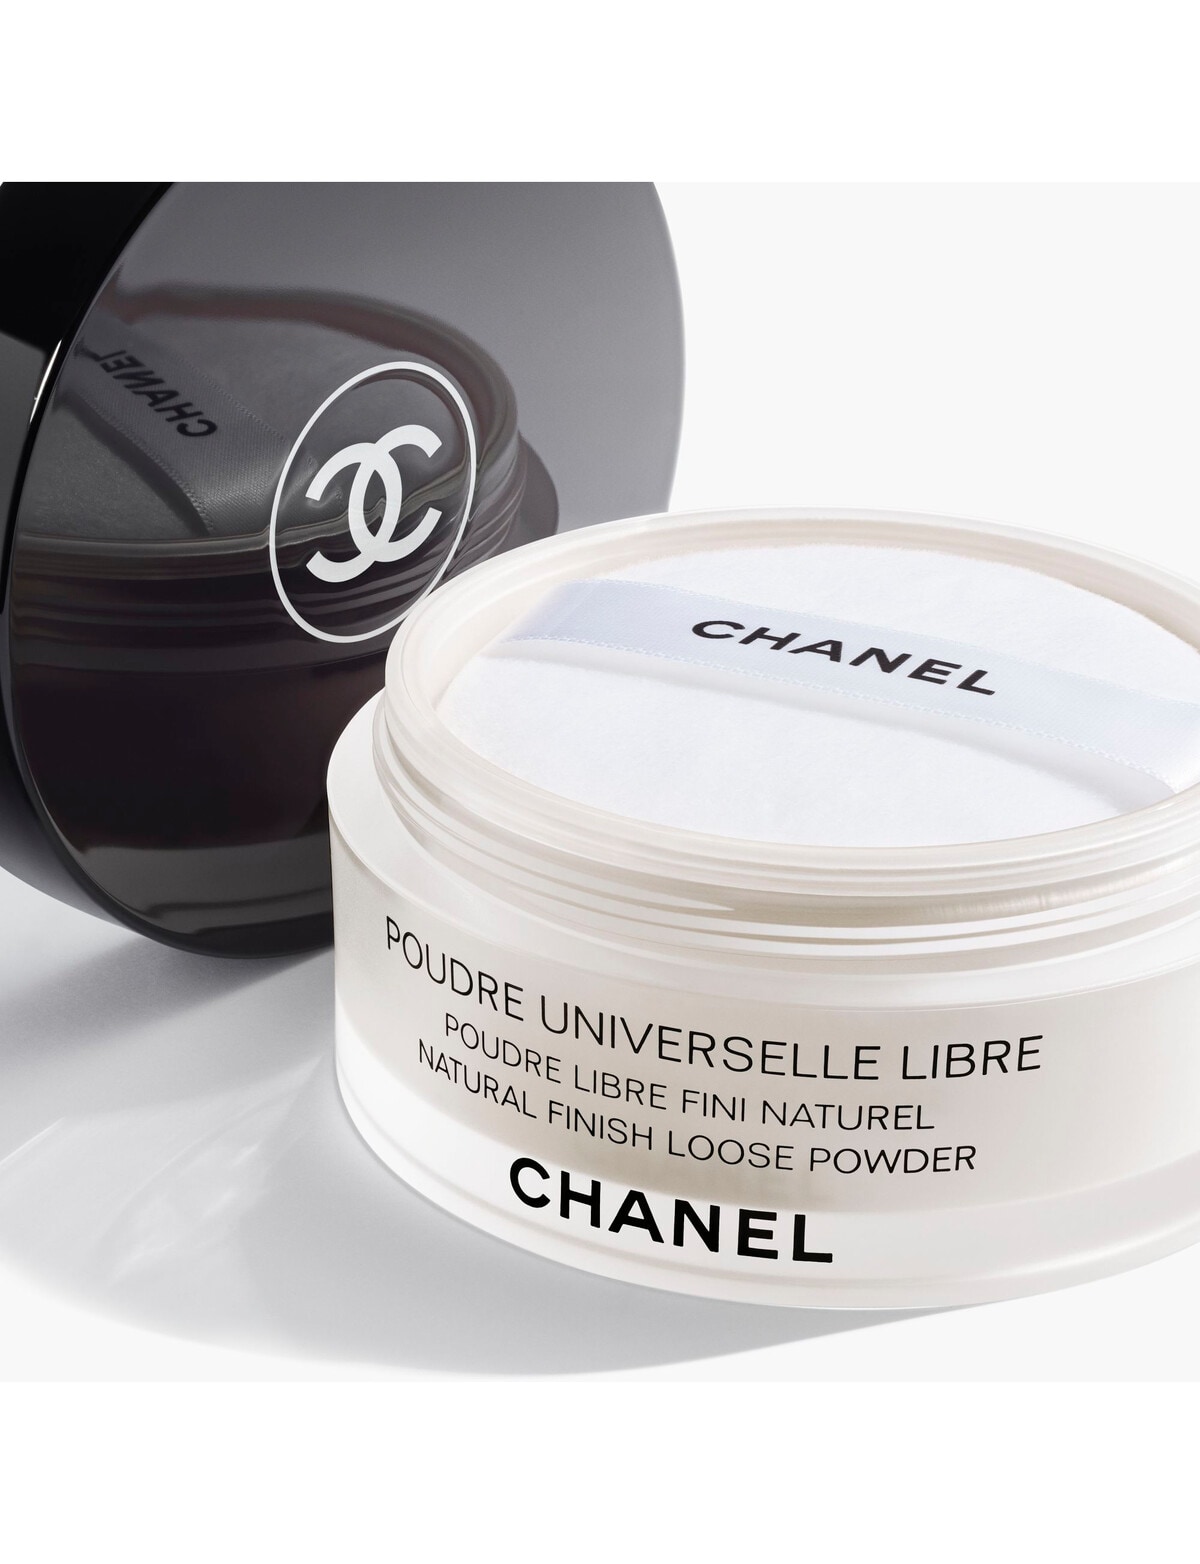 CHANEL POUDRE UNIVERSELLE LIBRE Natural Finish Loose Powder - BRONZERS